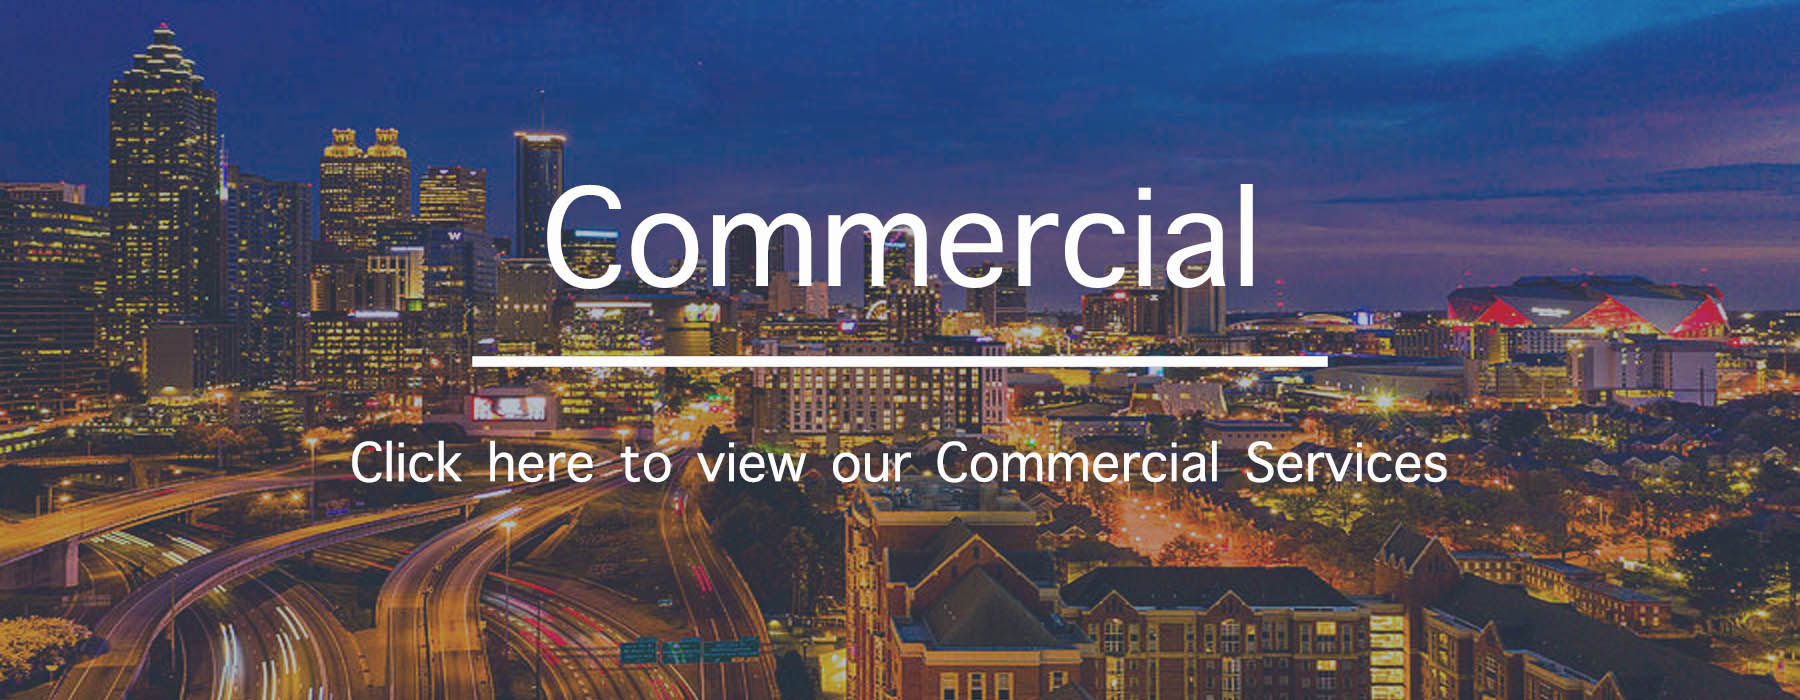 Link to view our Commercial Services